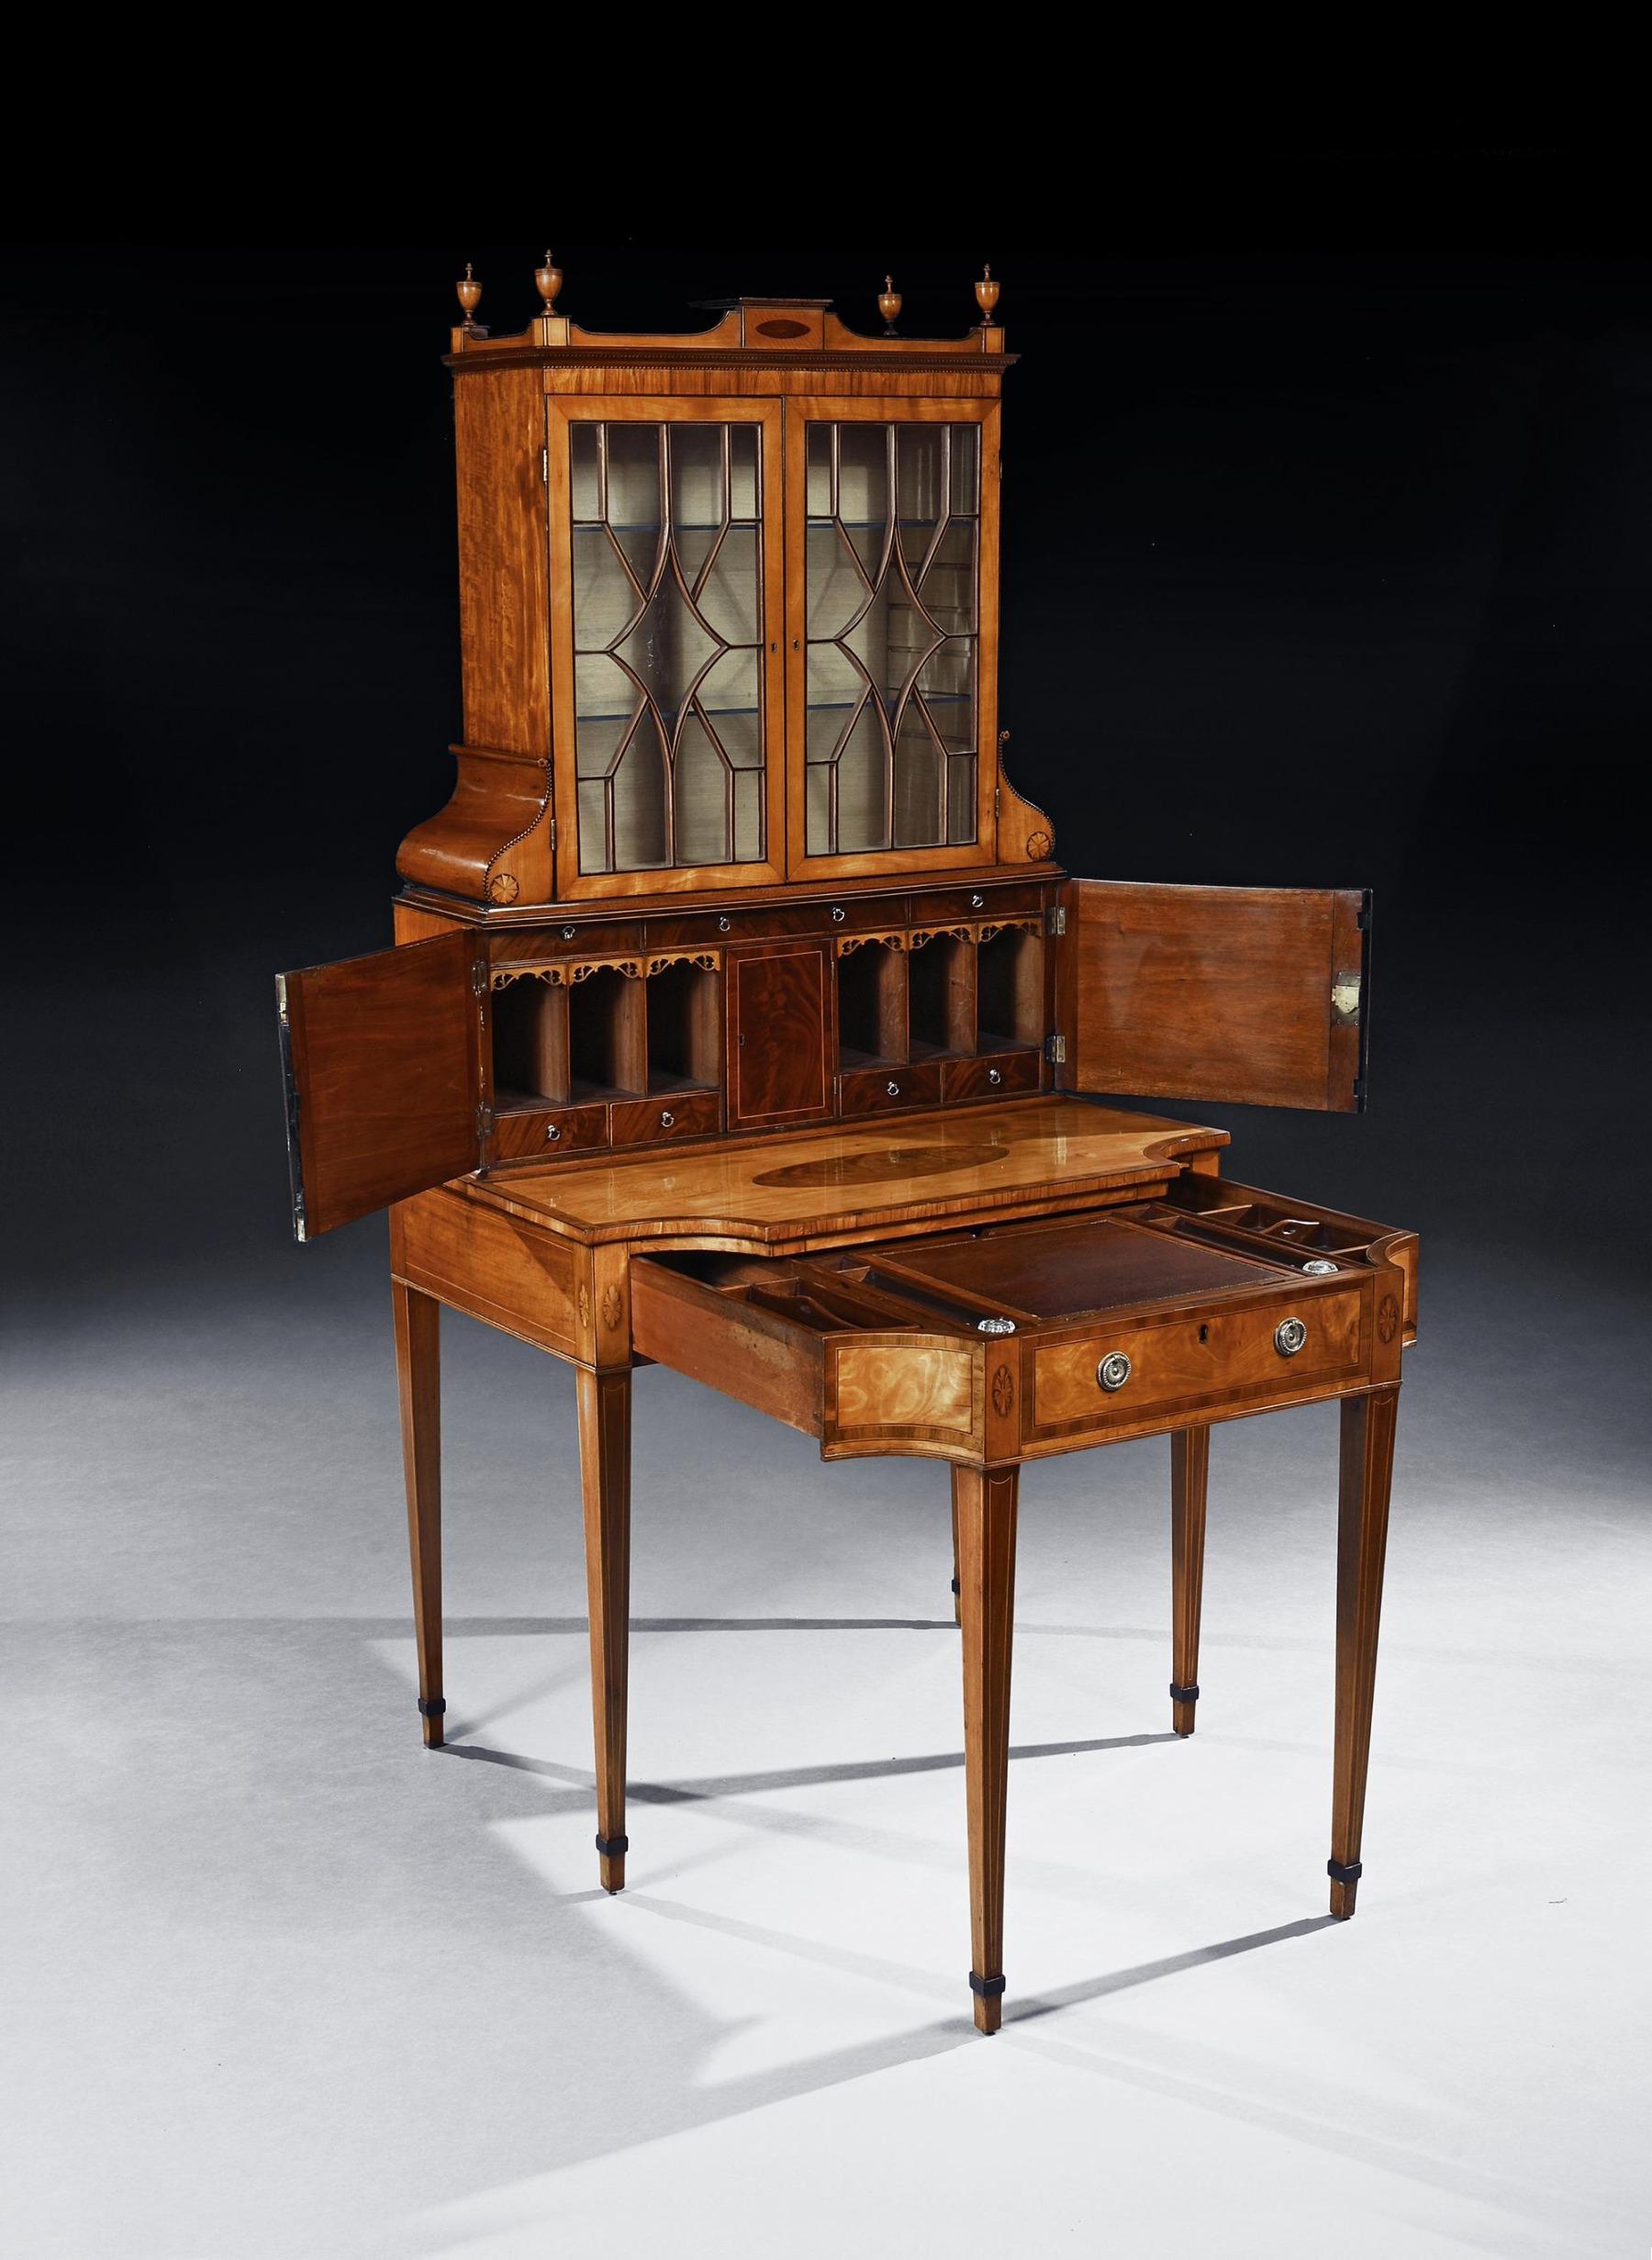 Late 18th Century  An Important 18th Century George Iii Satinwood and Sabicu Writing Cabinet For Sale